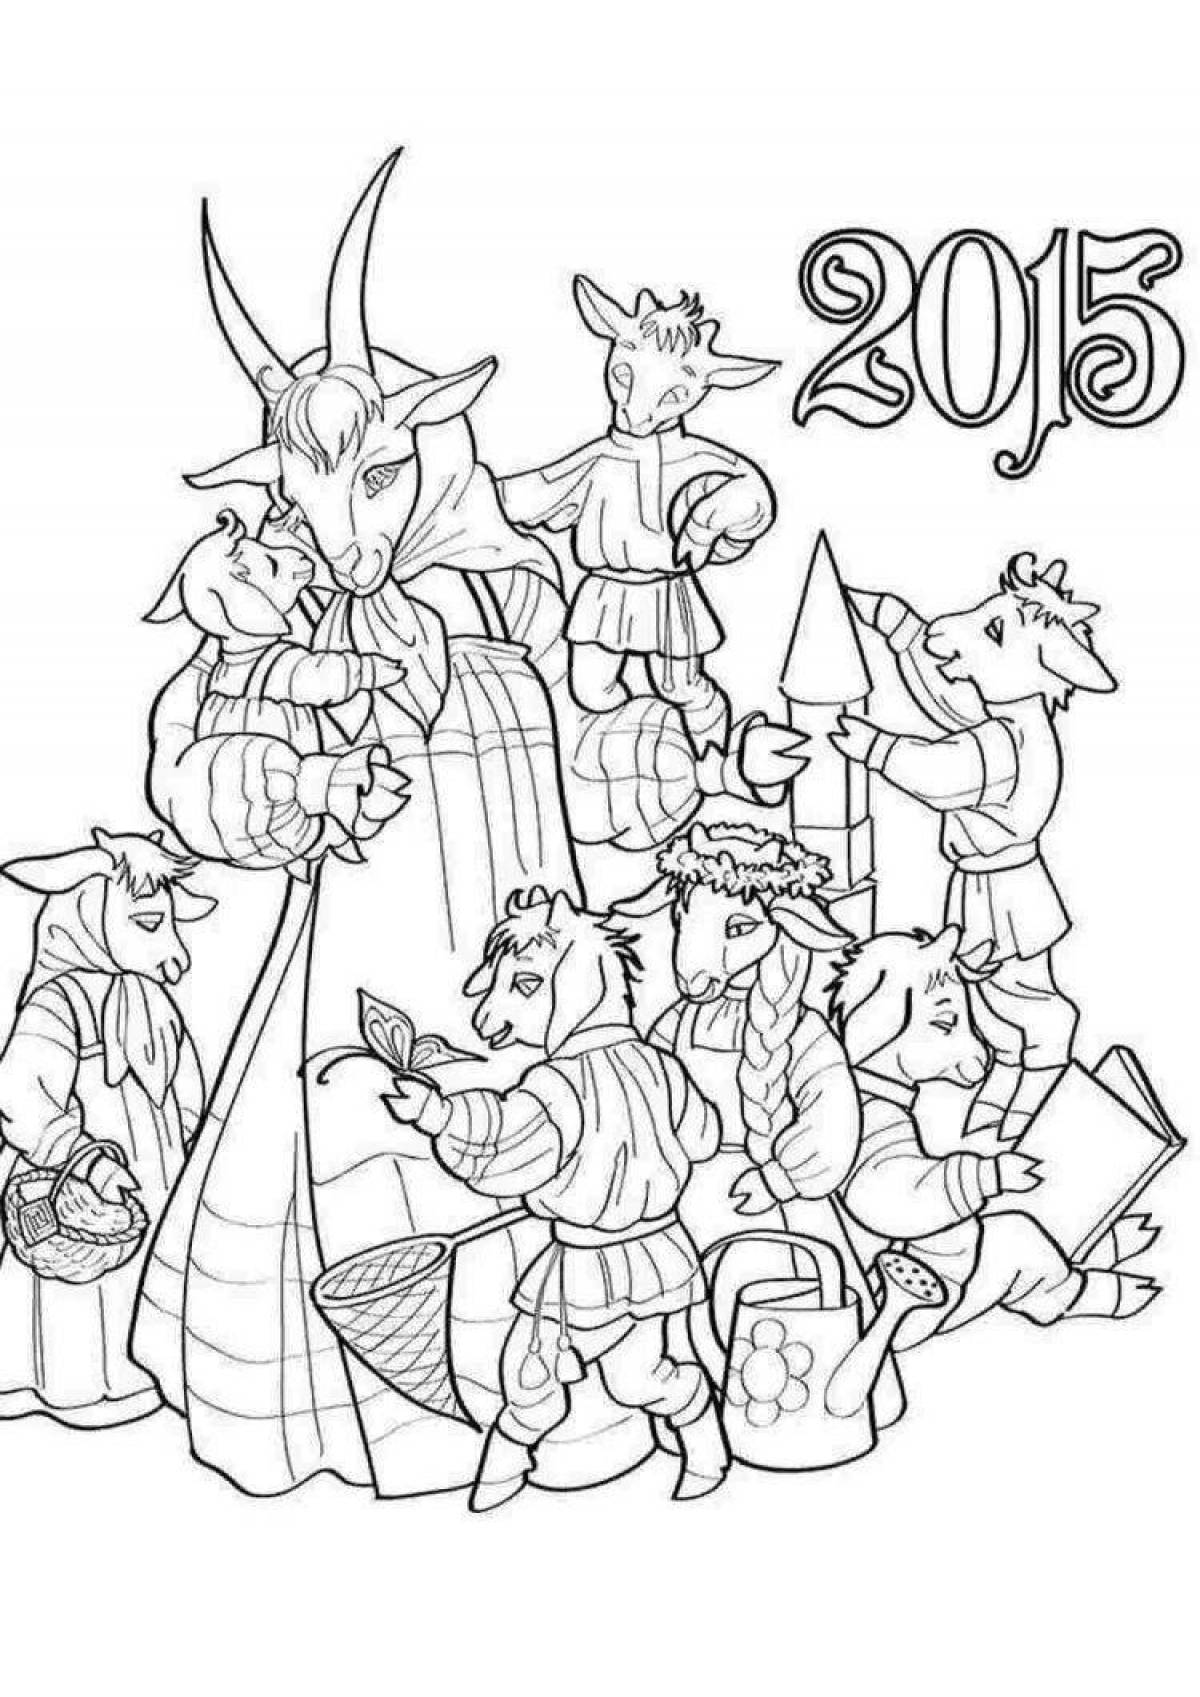 Coloring book playful goat and seven kids